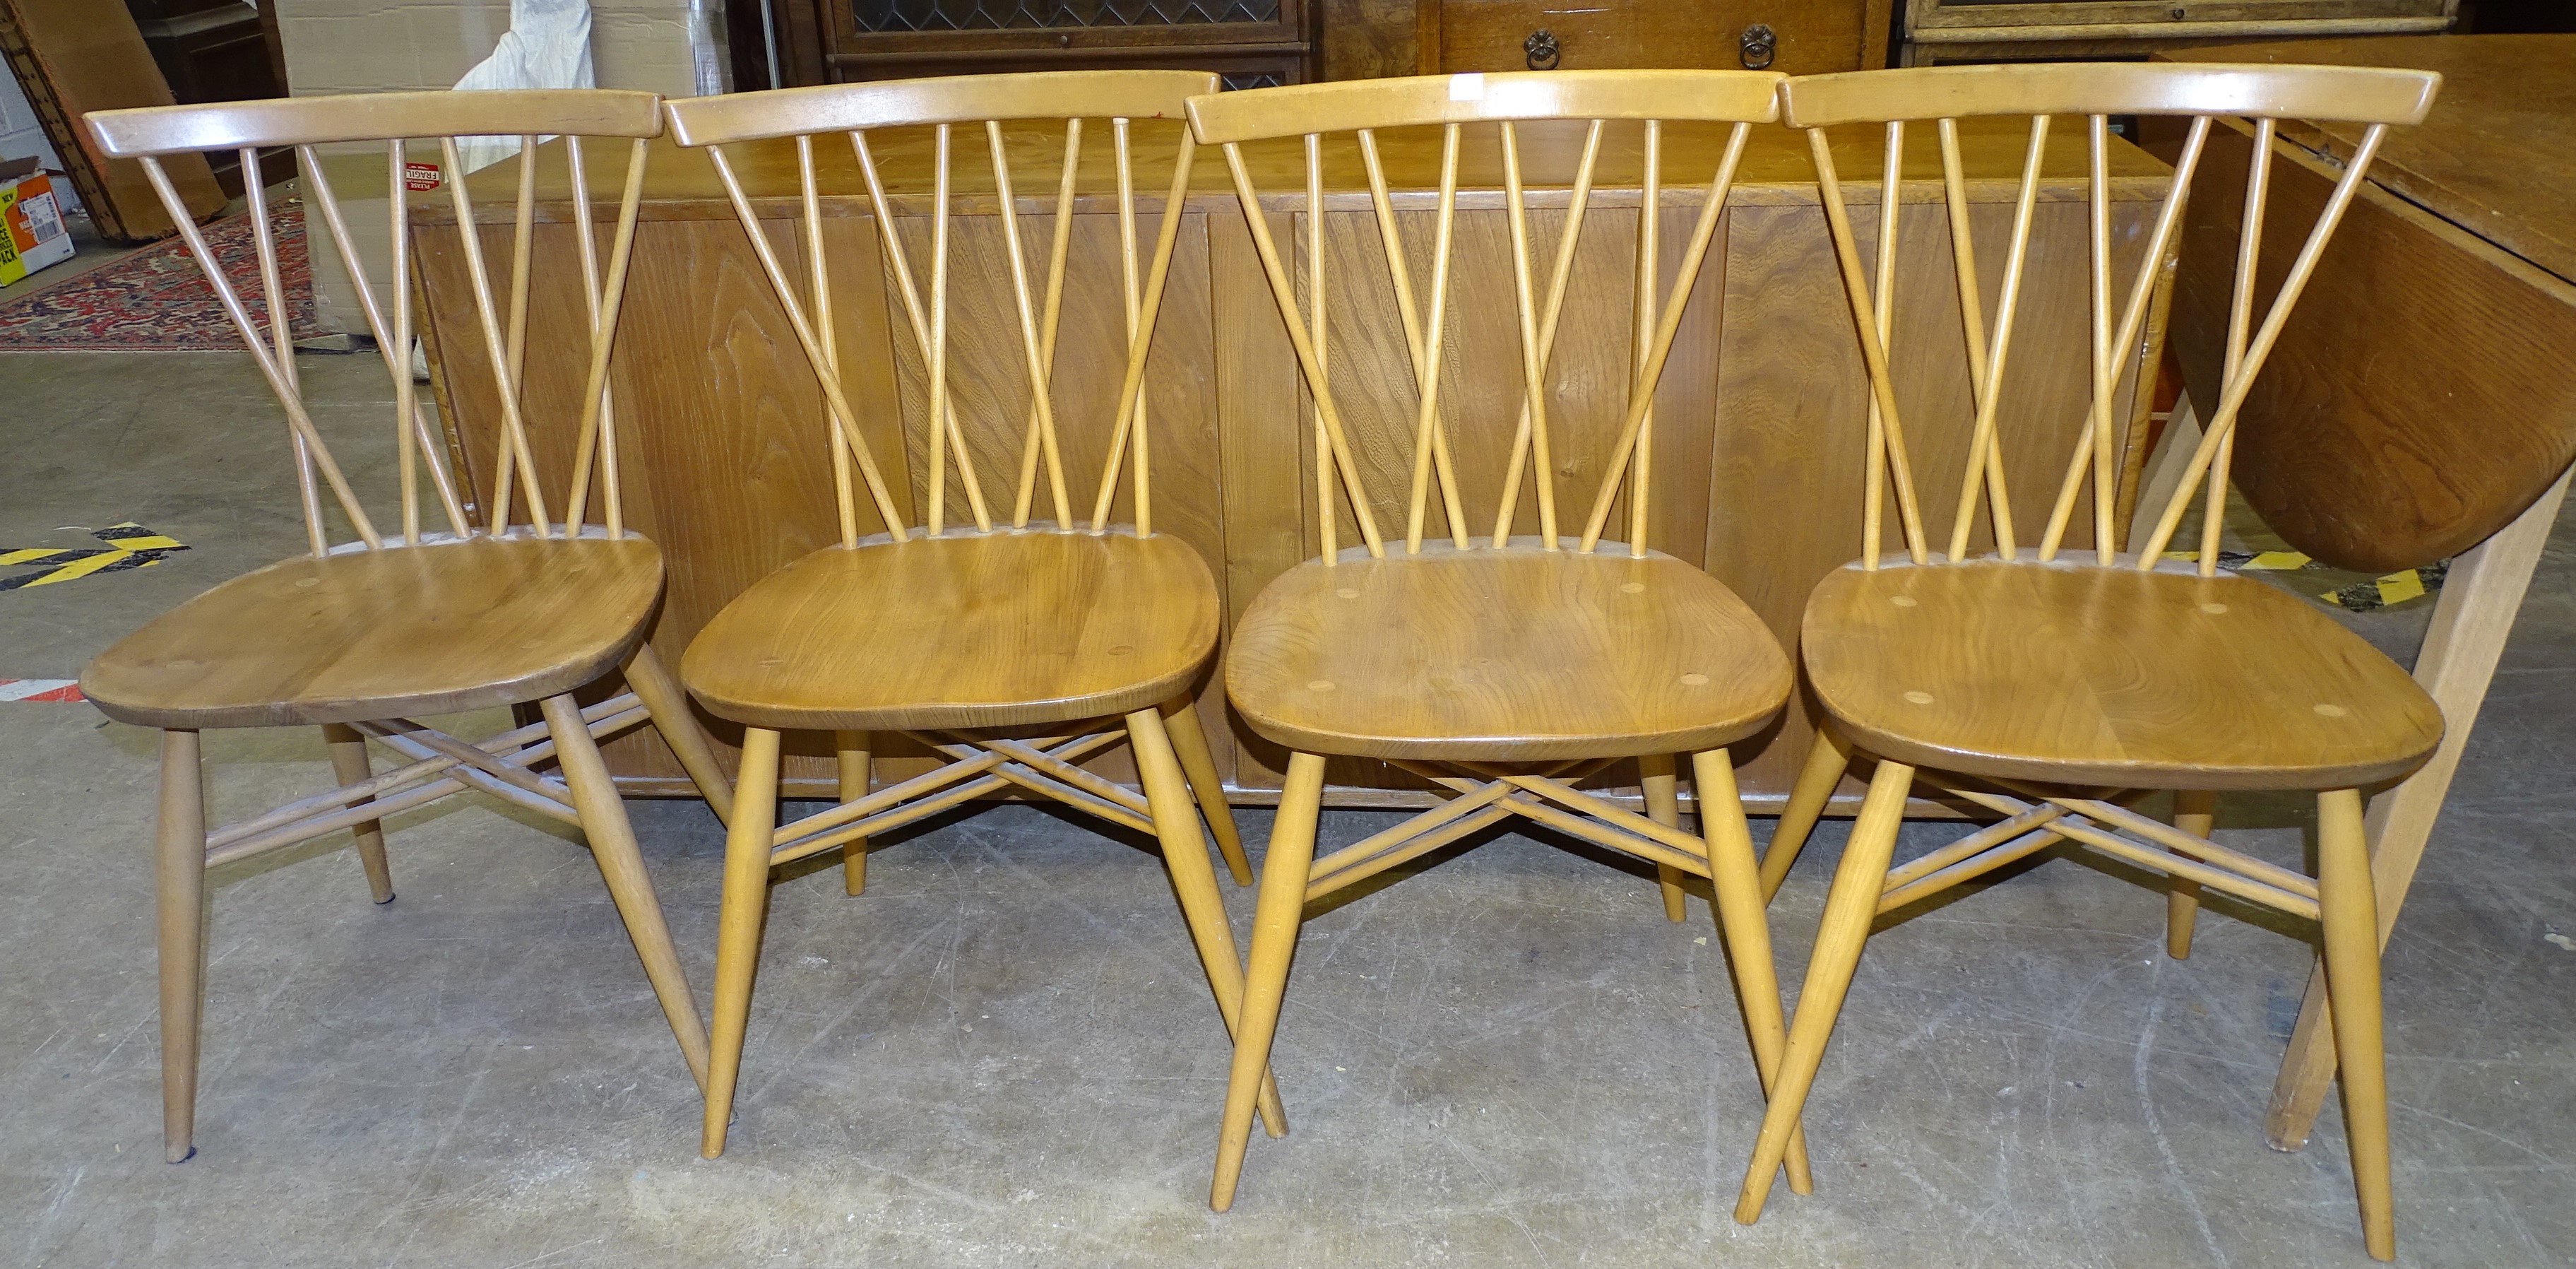 A set of four Ercol 376 candlestick lattice dining chairs together with a low sideboard fitted